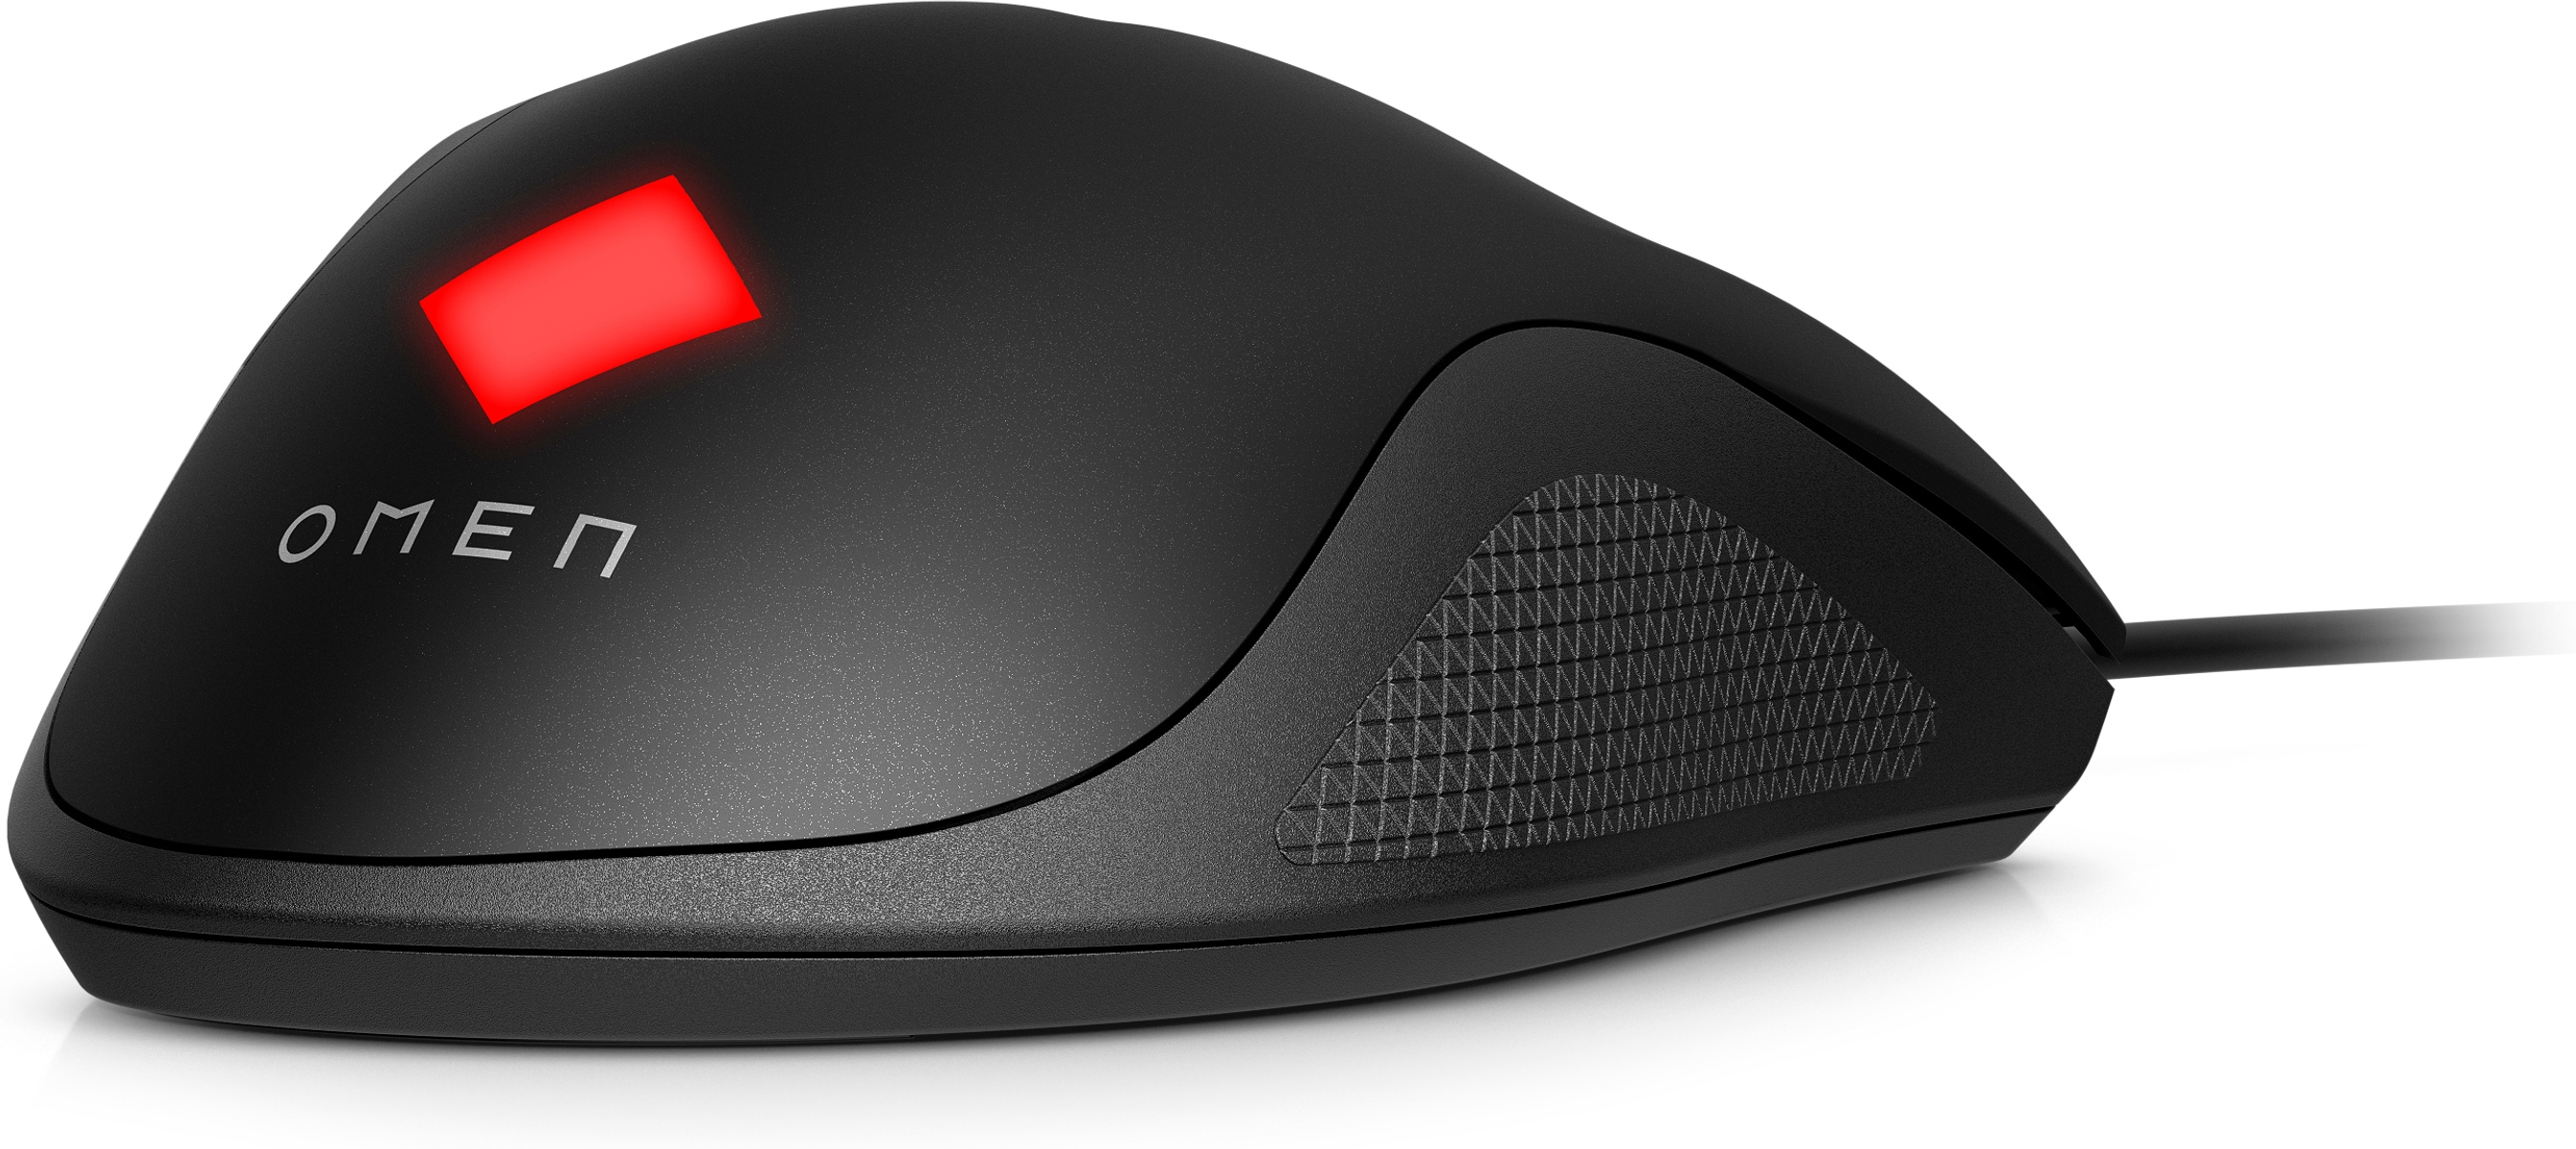 Gaming-Maus, GAMING OMEN Schwarz 8BC52AA MOUSE VECTOR HP ESSENTIAL